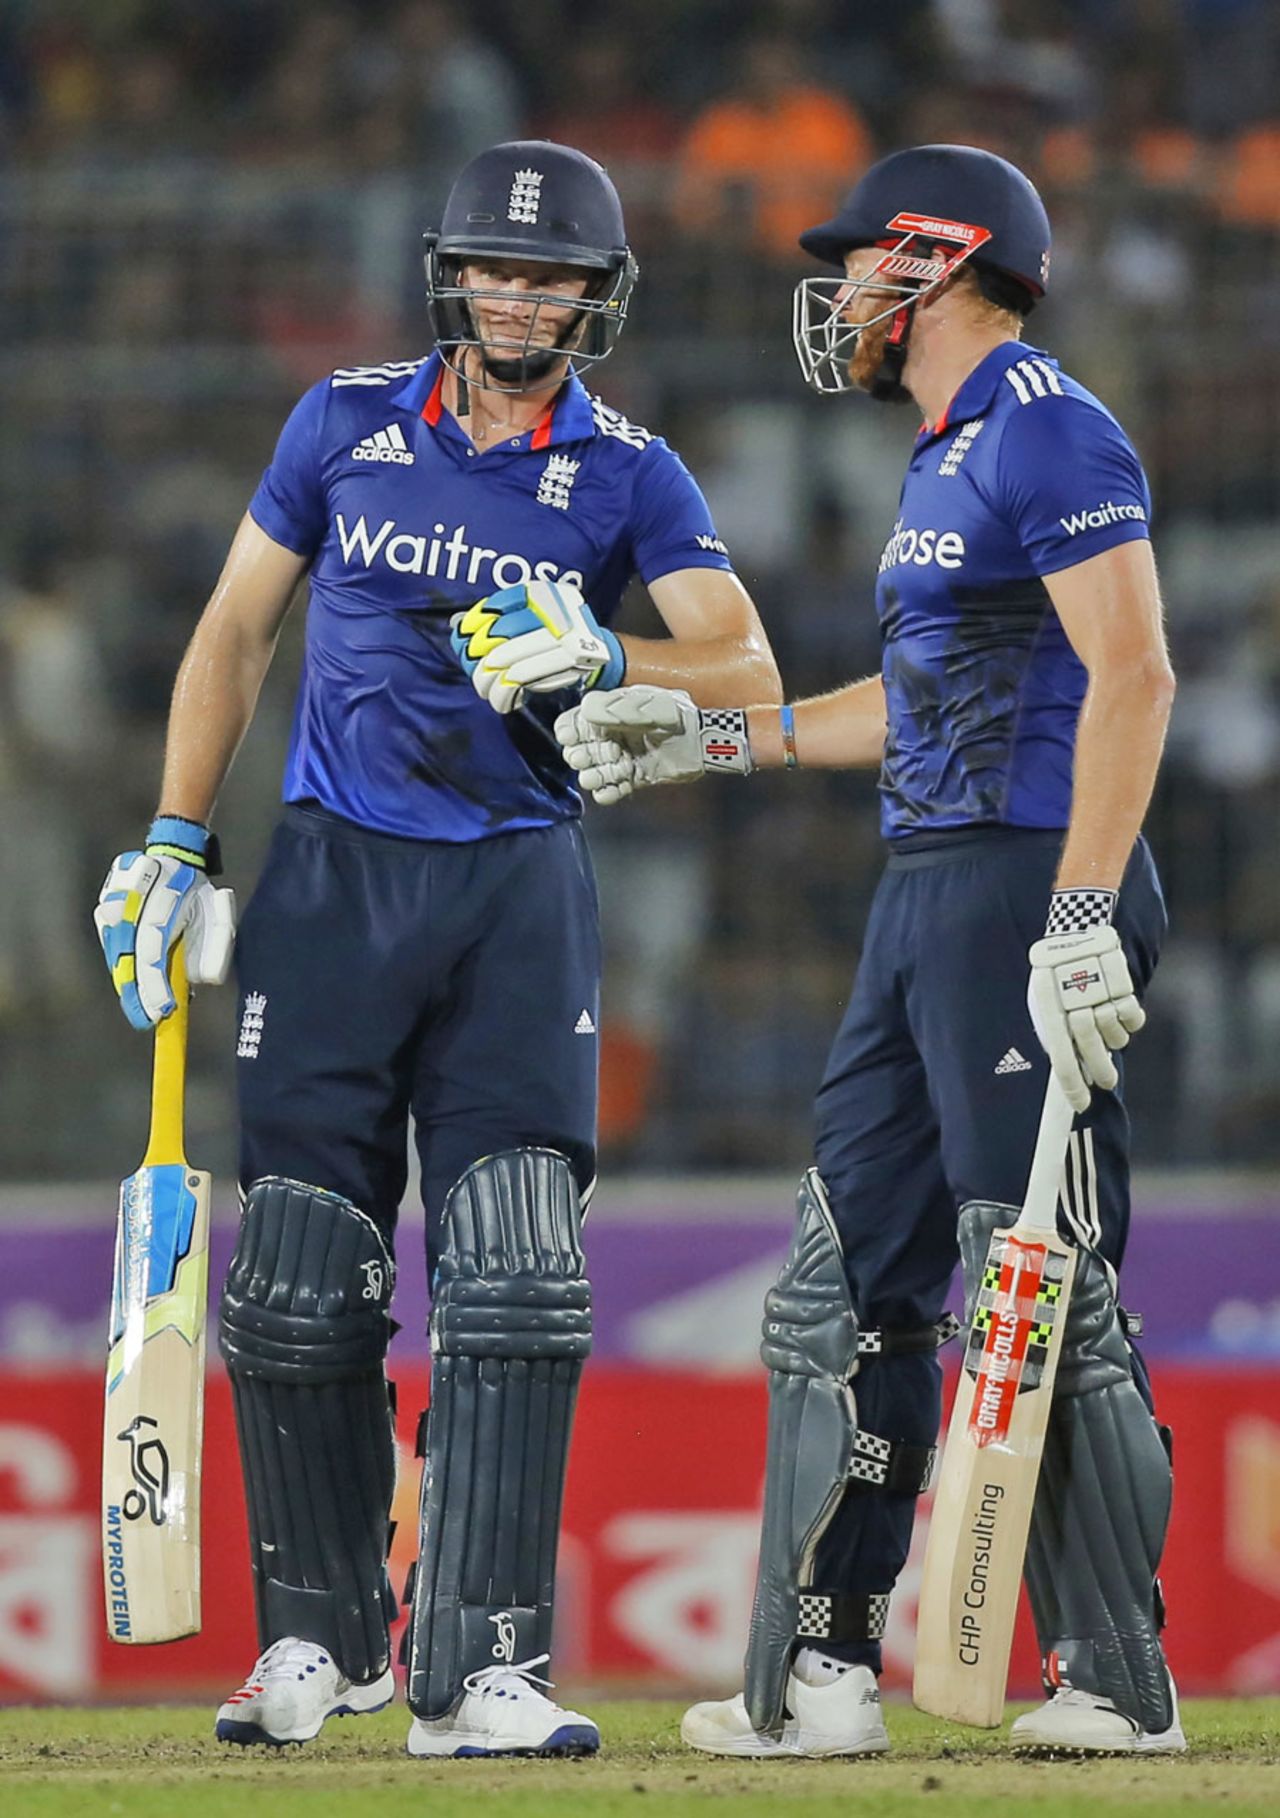 Jos Buttler and Jonny Bairstow resurrected England from 26 for 4, Bangladesh v England, 2nd ODI, Mirpur, October 9, 2016